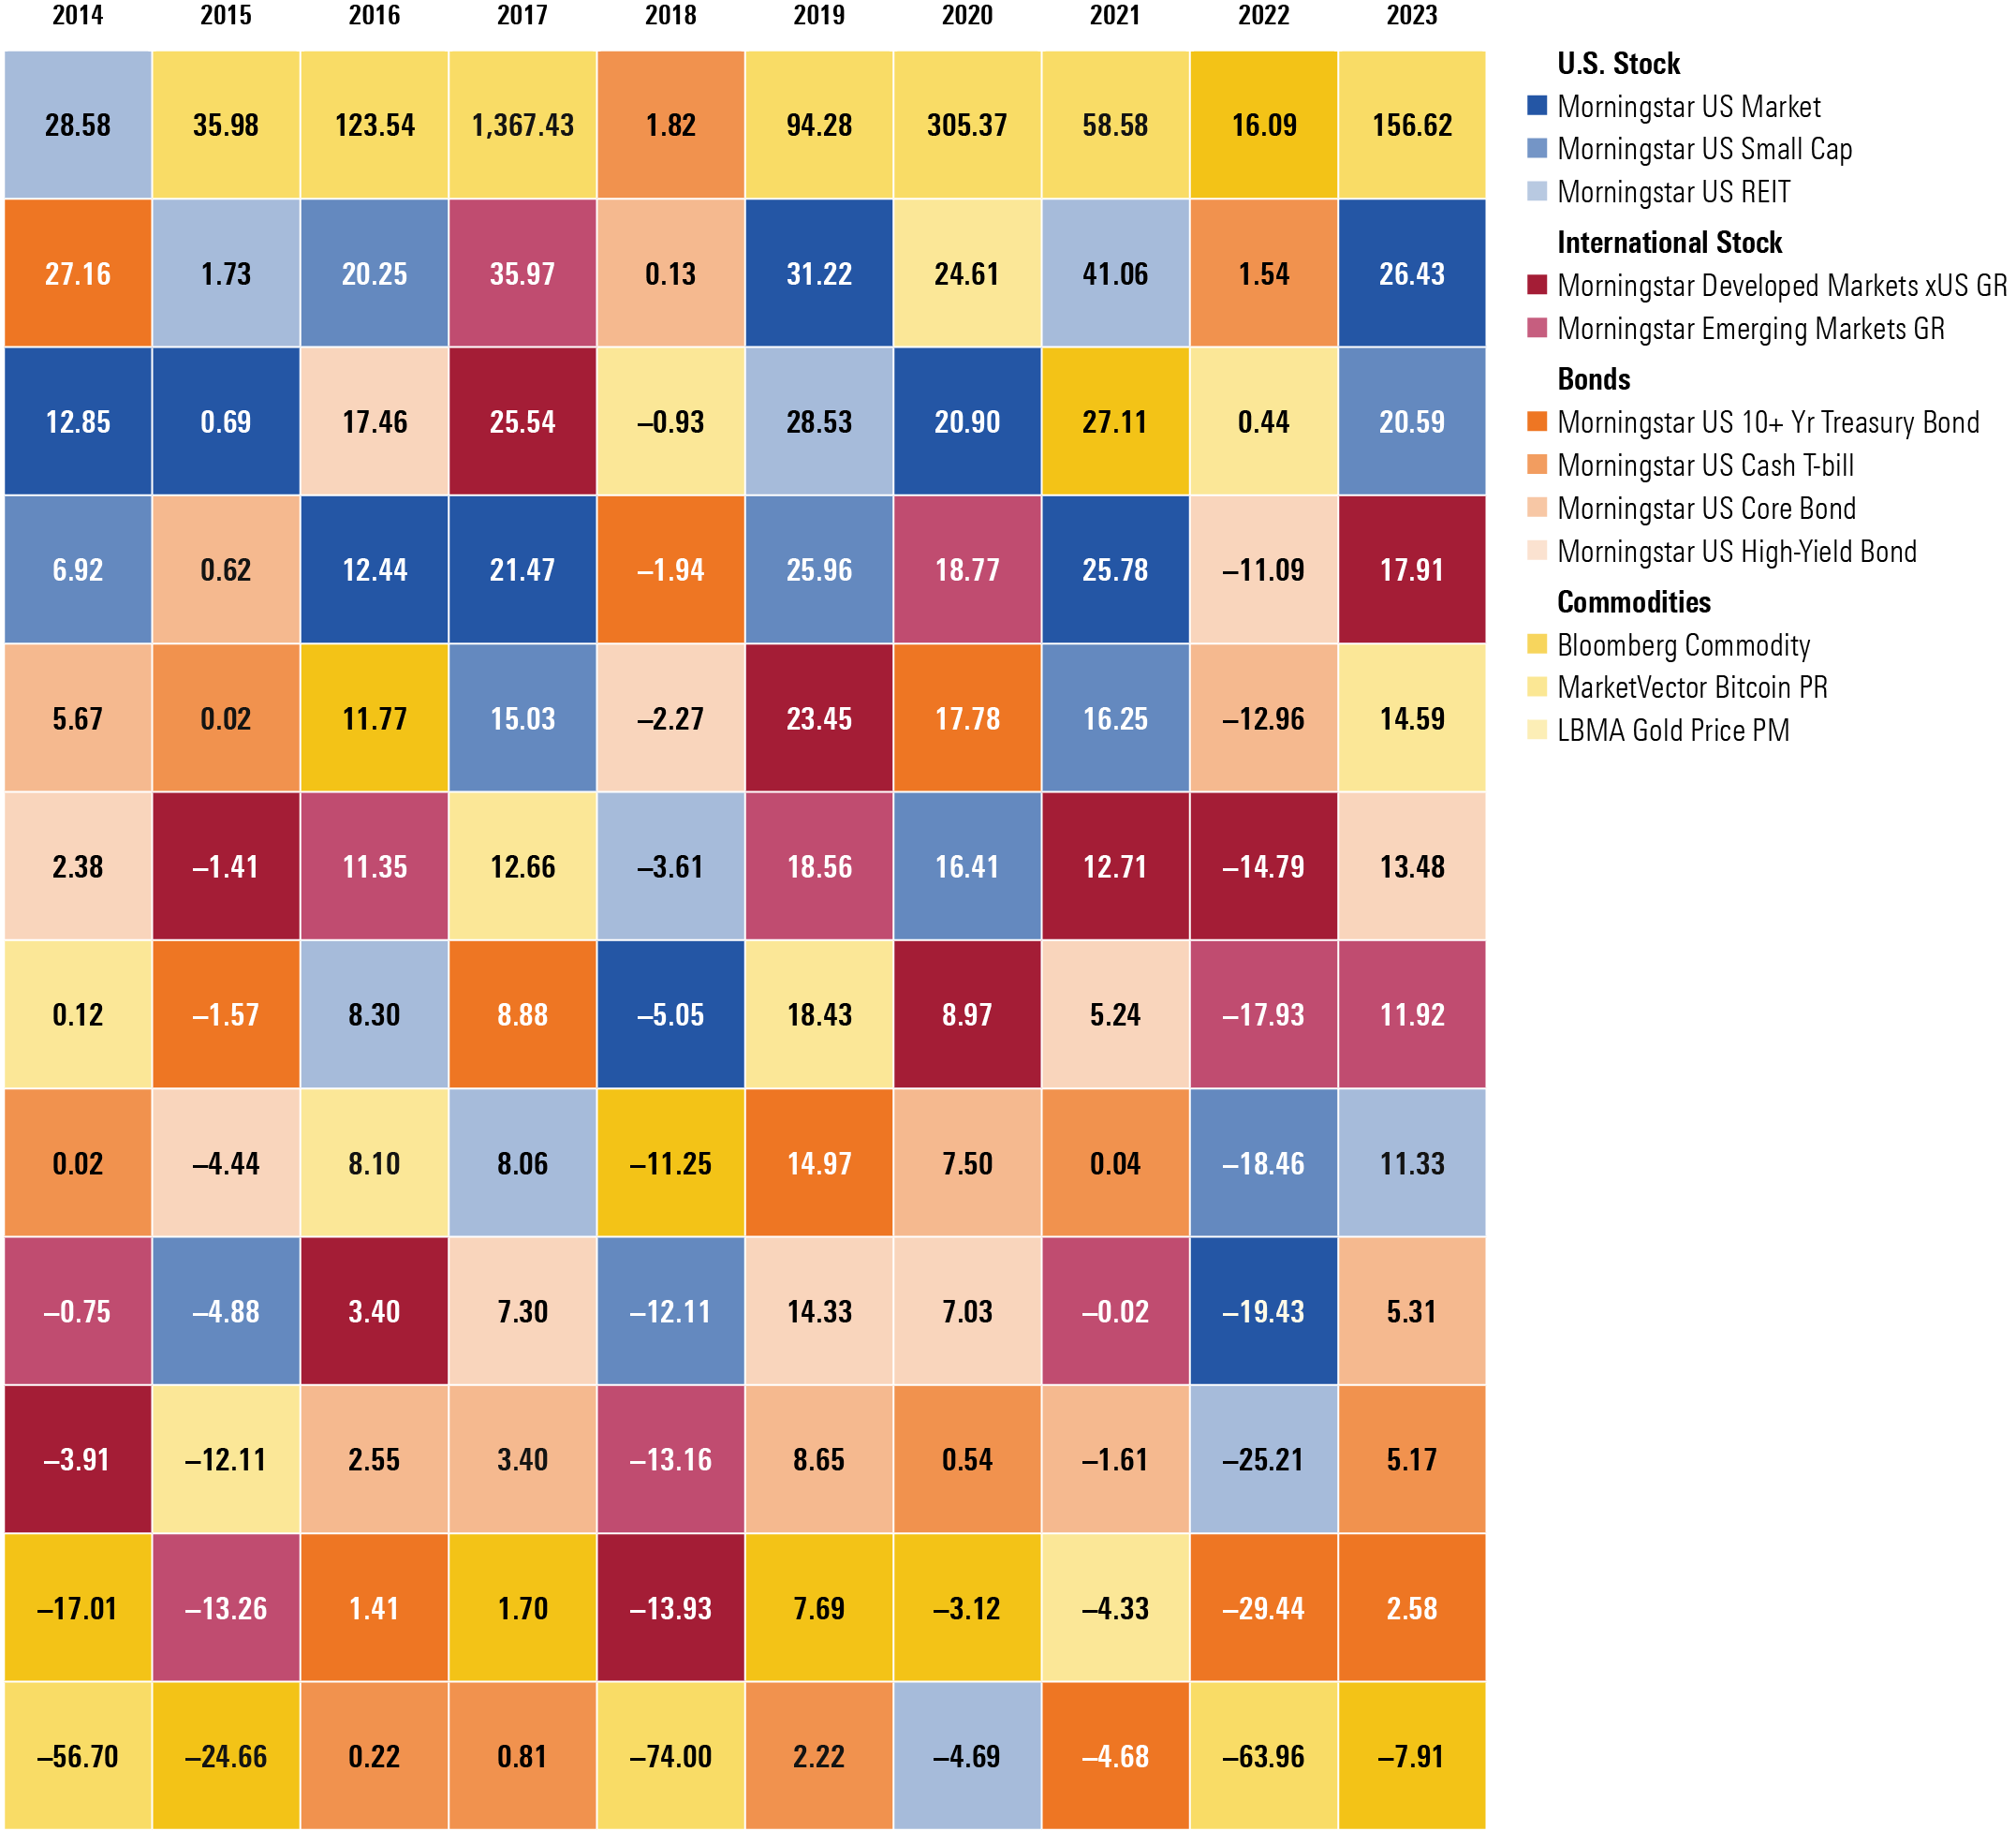 A chart showing the calendar-year returns for 12 different asset classes from 2014 through 2023.